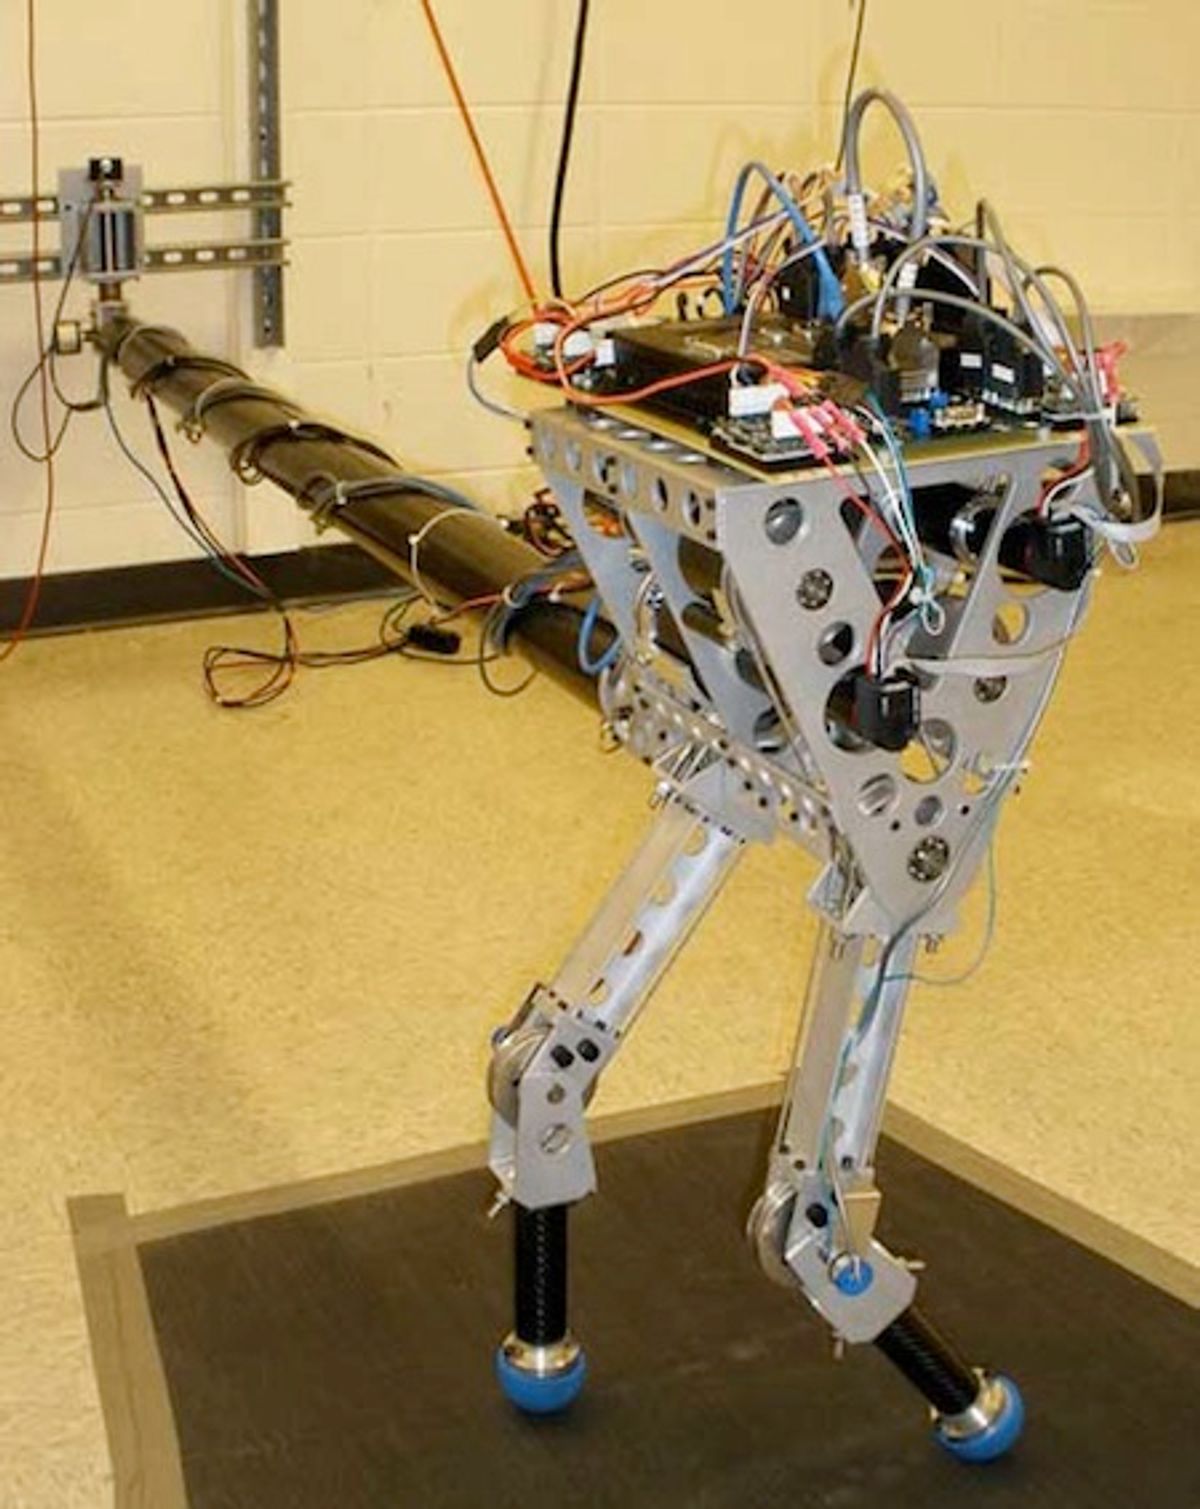 KURMET Bipedal Robot Can Hop Over Obstacles